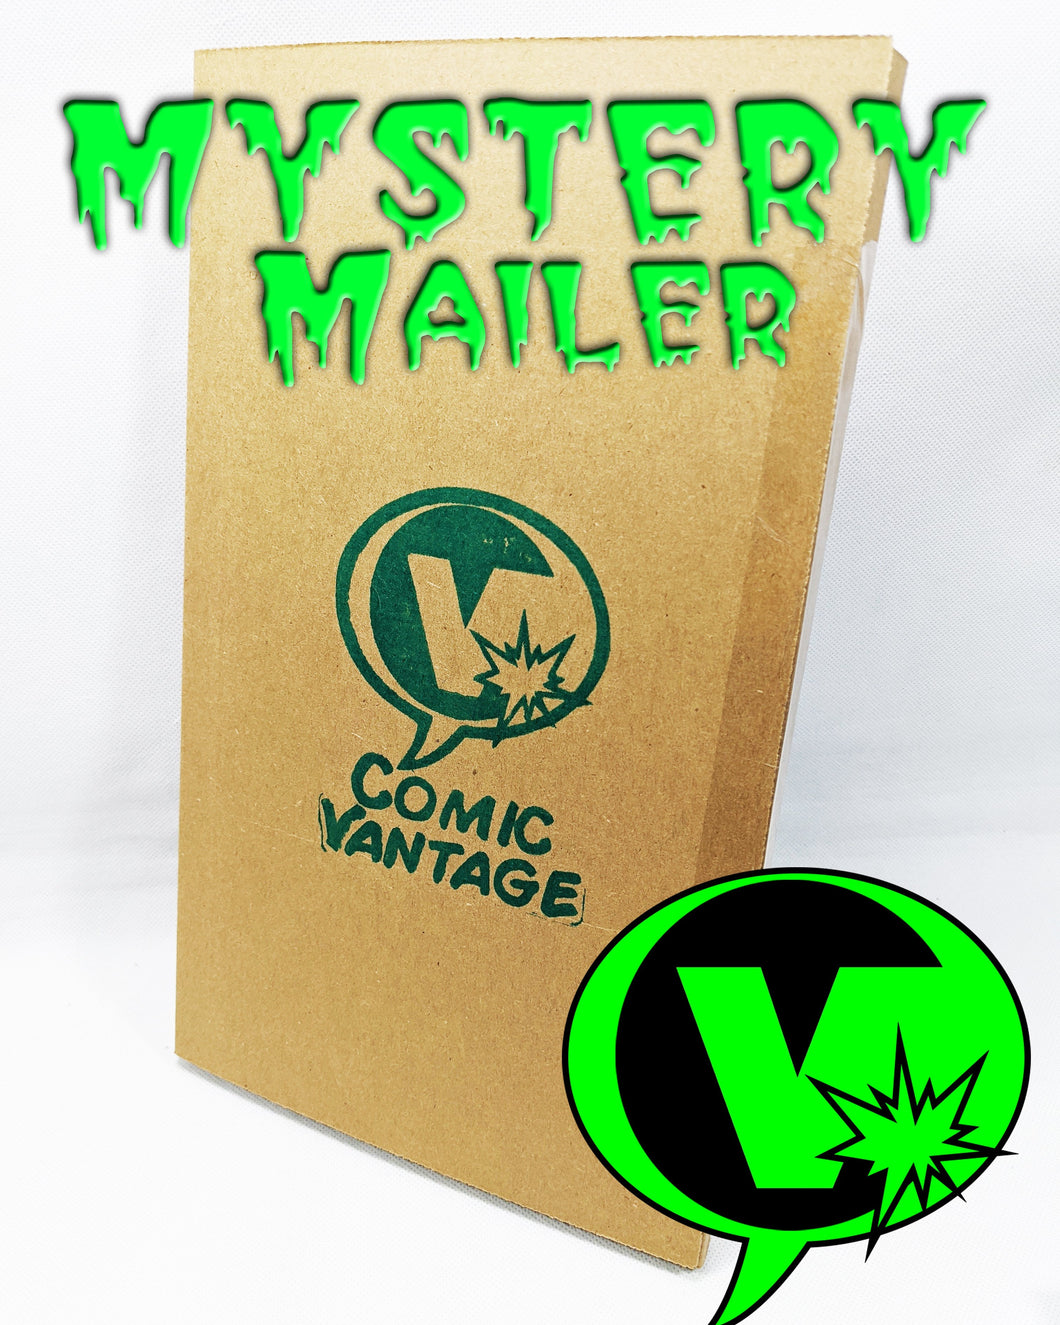 The One and Only Comic Vantage Mystery Mailer Box Season 34